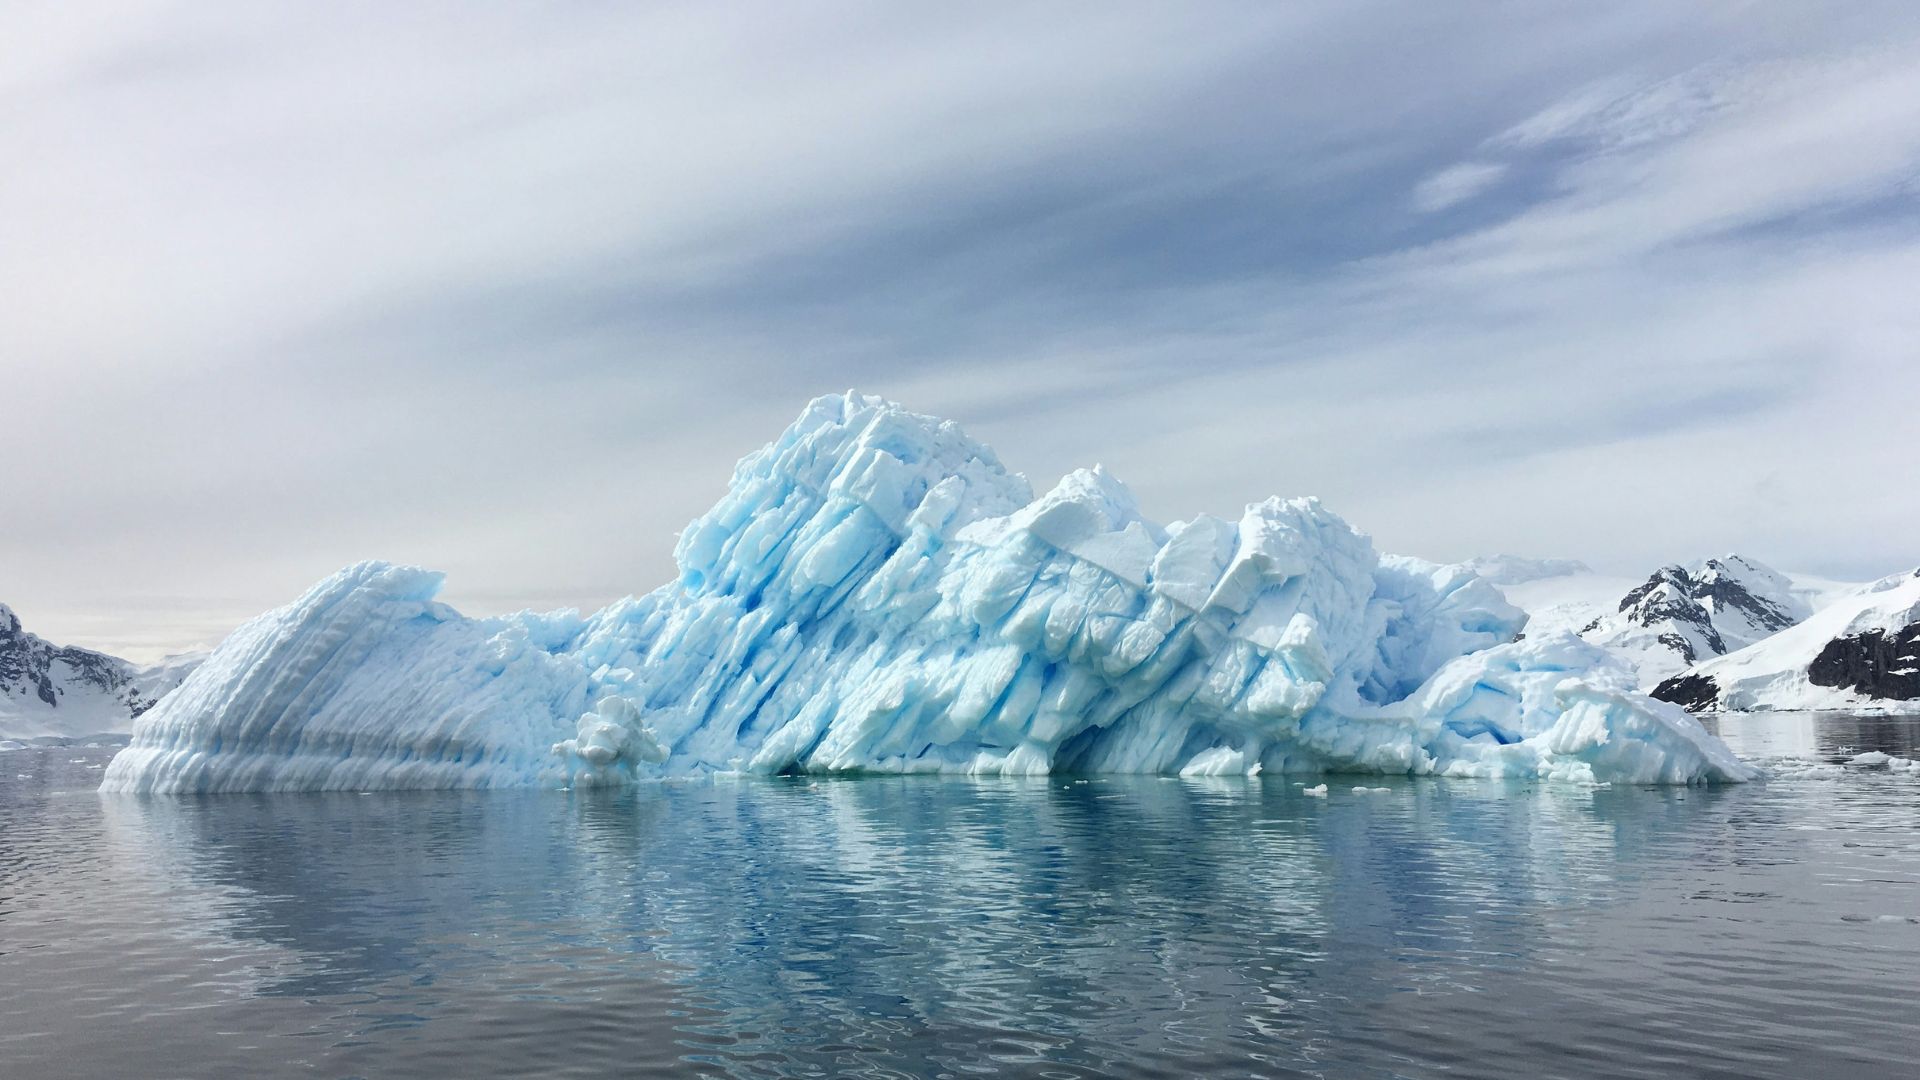 <p>The massive sheet of ice is roughly the same size as the state of Florida. Researchers note that as the glacier continues to erode and melt, the sea level will rise drastically. The team predicts that a large number of <a href="https://www.caredoctor.com/erosion-and-sea-level-rise-causes-luxury-waterfront-homes-to-sell-at-a-fraction-of-their-price/">coastal communities and homes</a> will be swept away by rising waters and erosion in the near future.   </p> <p>Low-lying beaches like Seal Beach and the Maldives might disappear completely. Researchers assume the sea level could rise by as much as two feet. As more water is added to the ocean, marine life and ocean currents will also suffer.   </p>